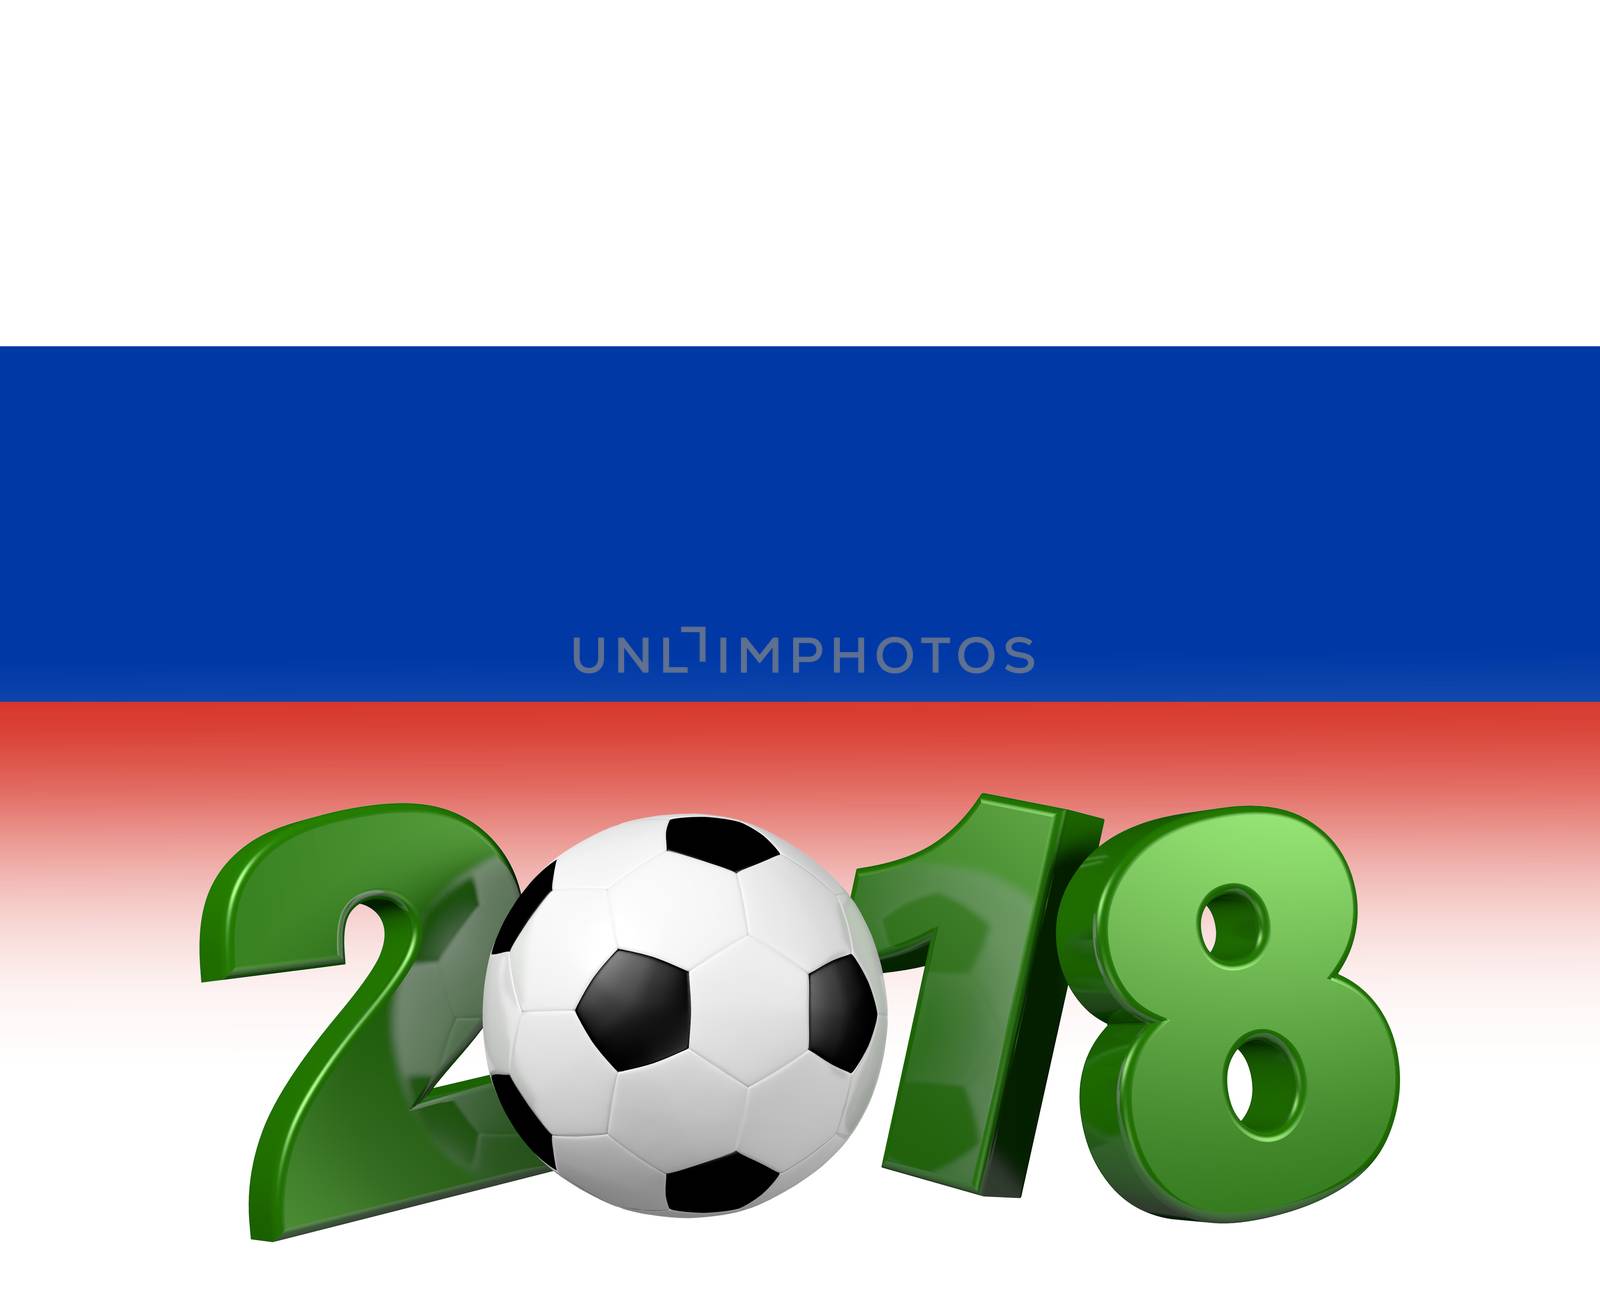 Soccer 2018 with russian flag by shkyo30